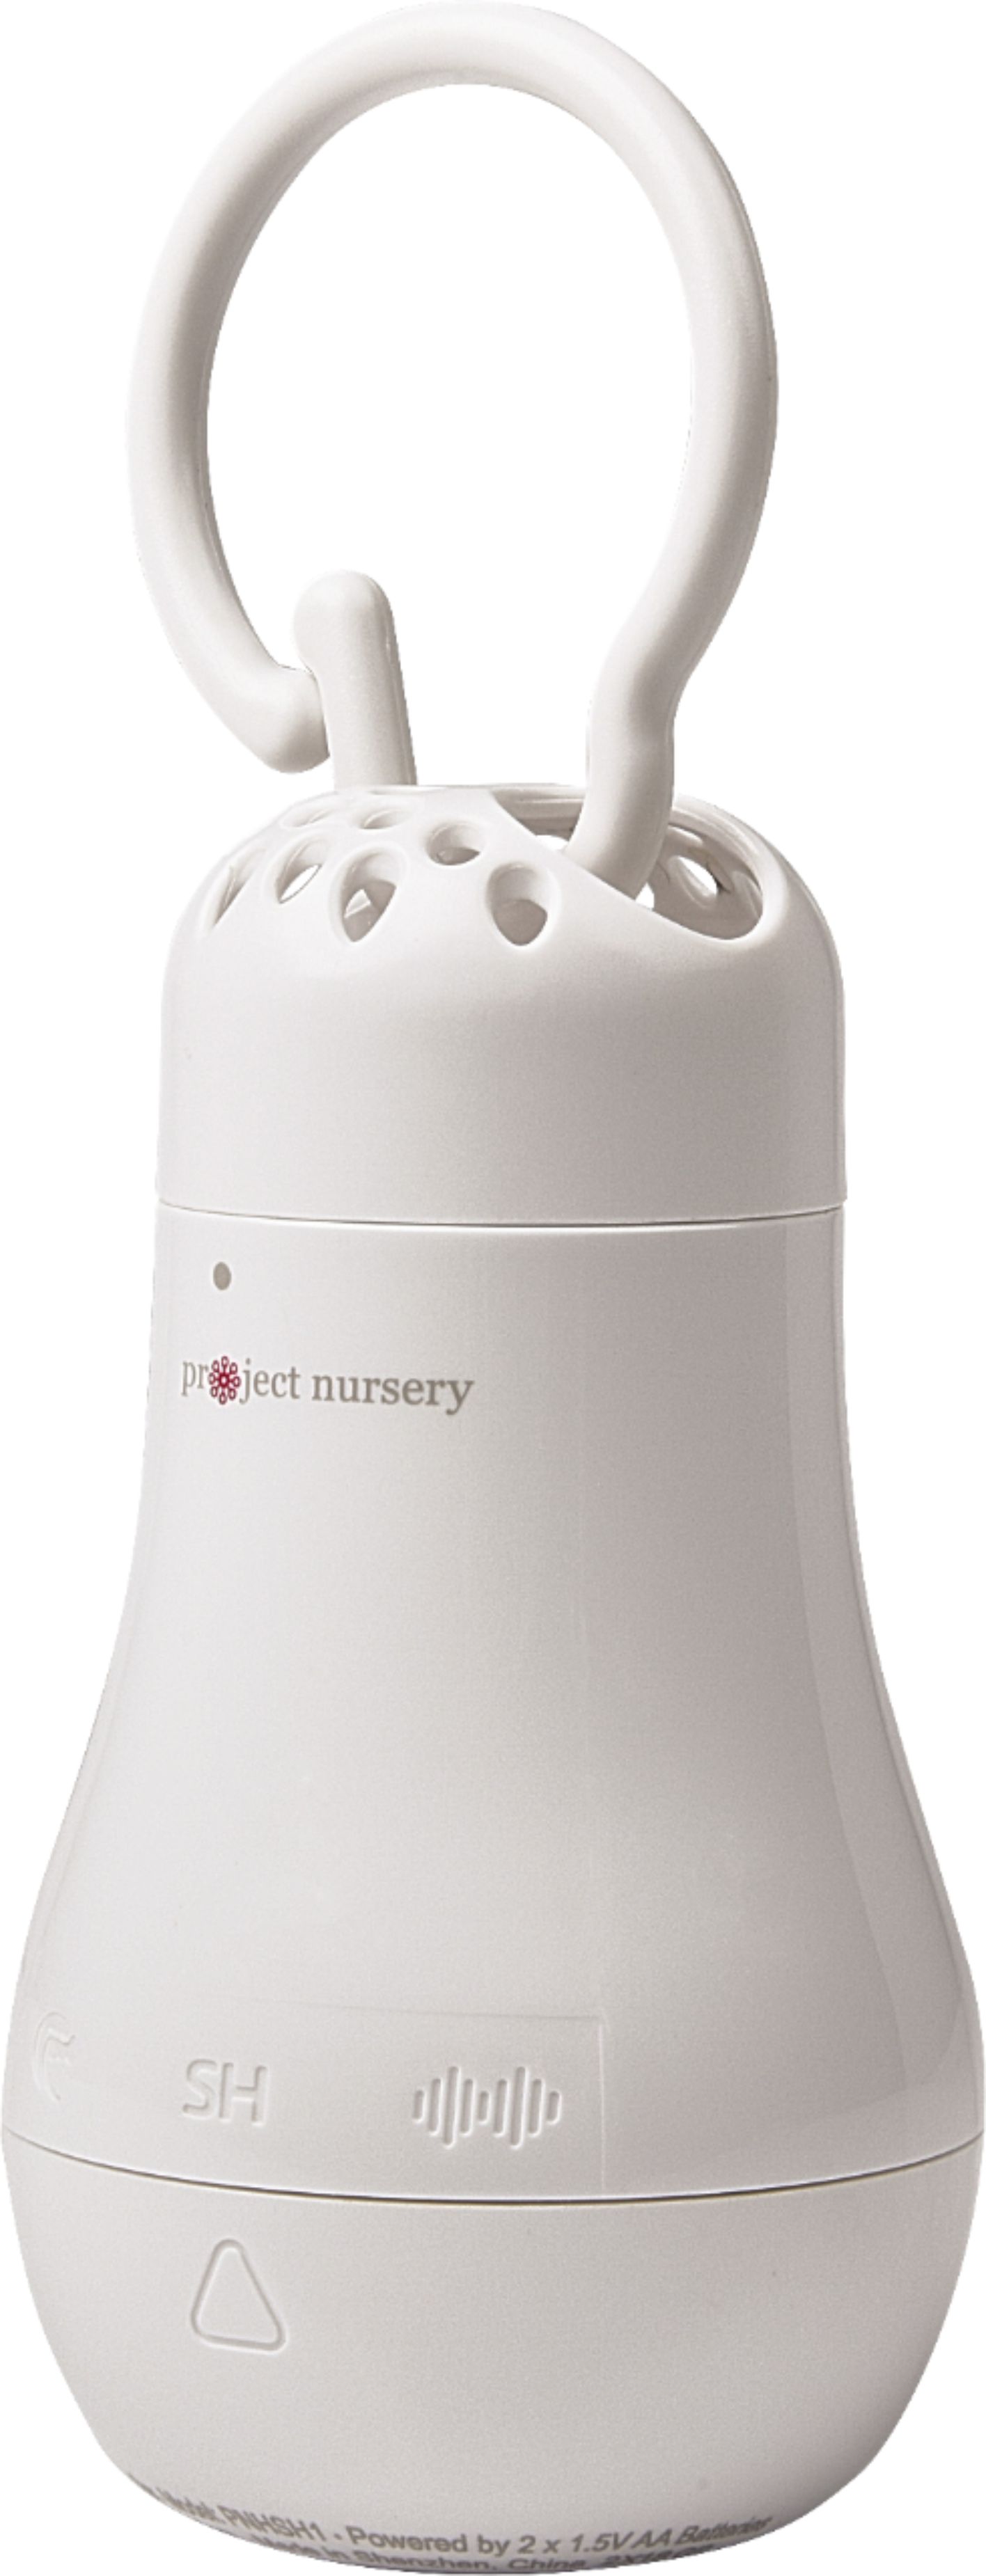 Angle View: Project Nursery - Hush Baby Sound Soother with 3 pre-loaded sounds and flexible clip - White